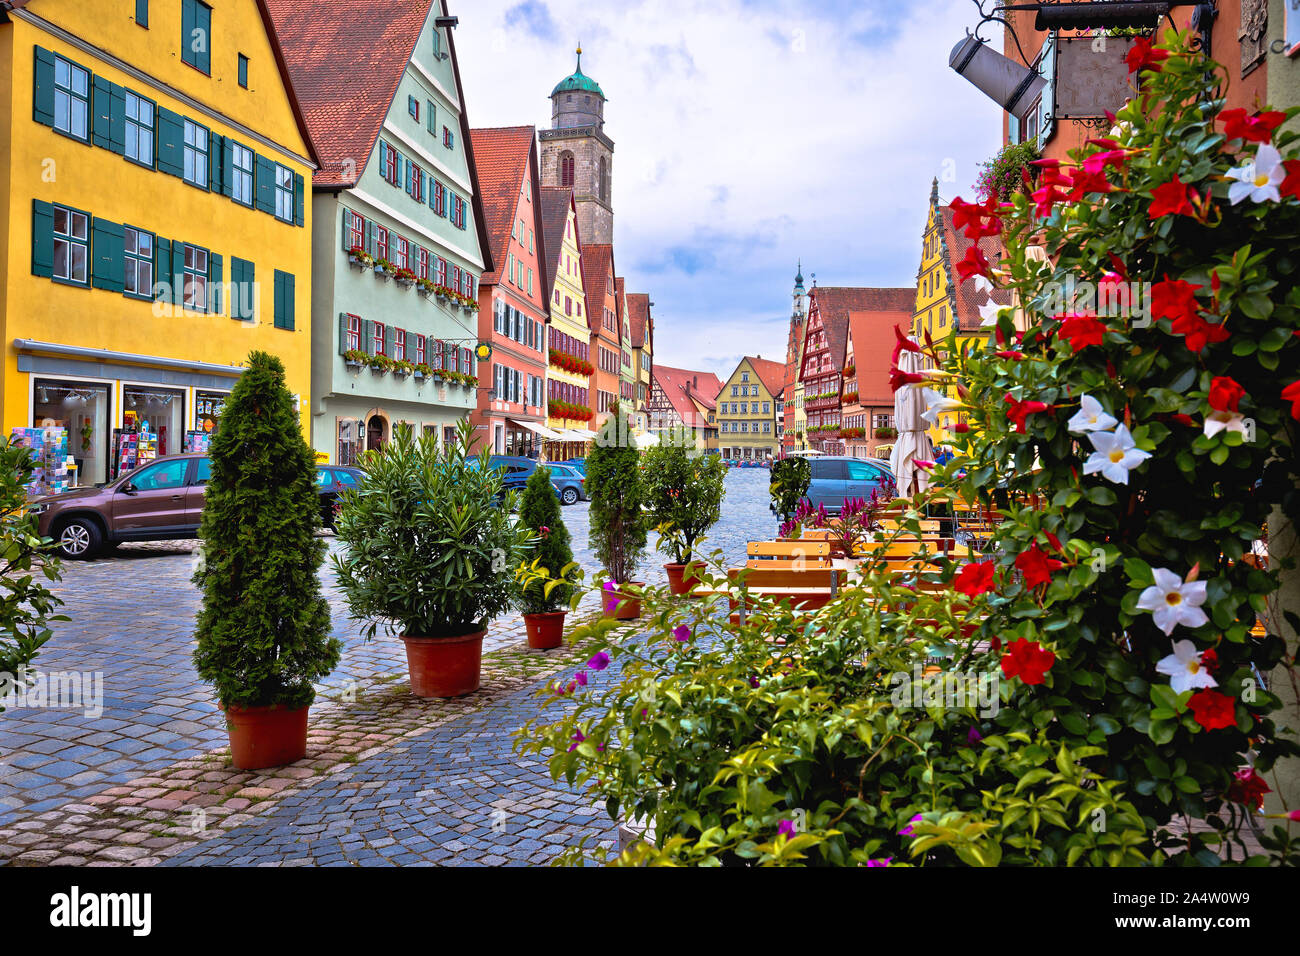 Colorful German facades of historic town of Dinkelsbuhl, Romantic road of Bavaria region of Germany Stock Photo